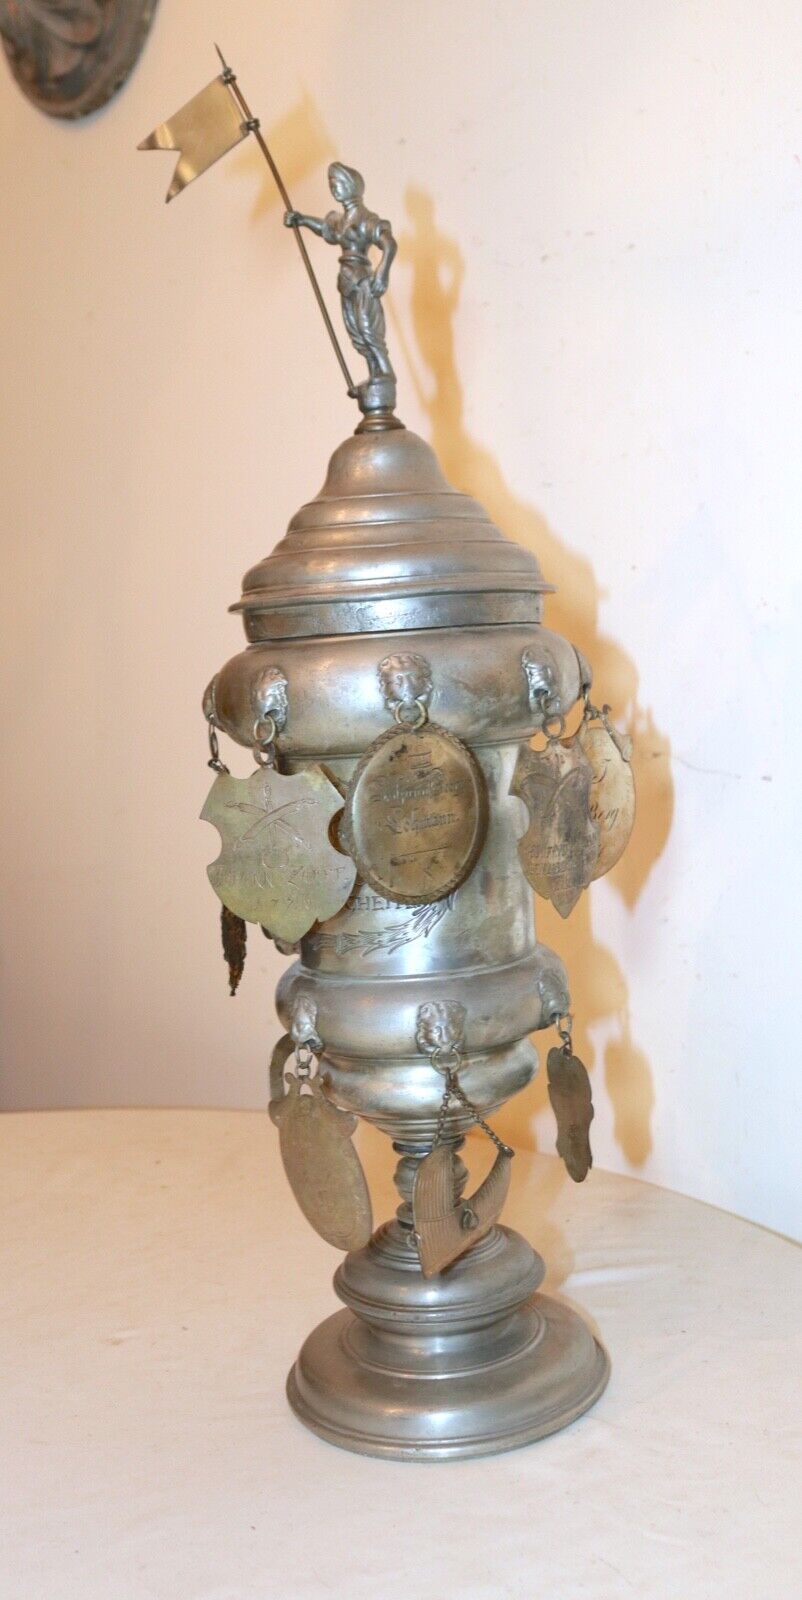 RARE LARGE antique 17th century German handmade forged pewter lidded family urn